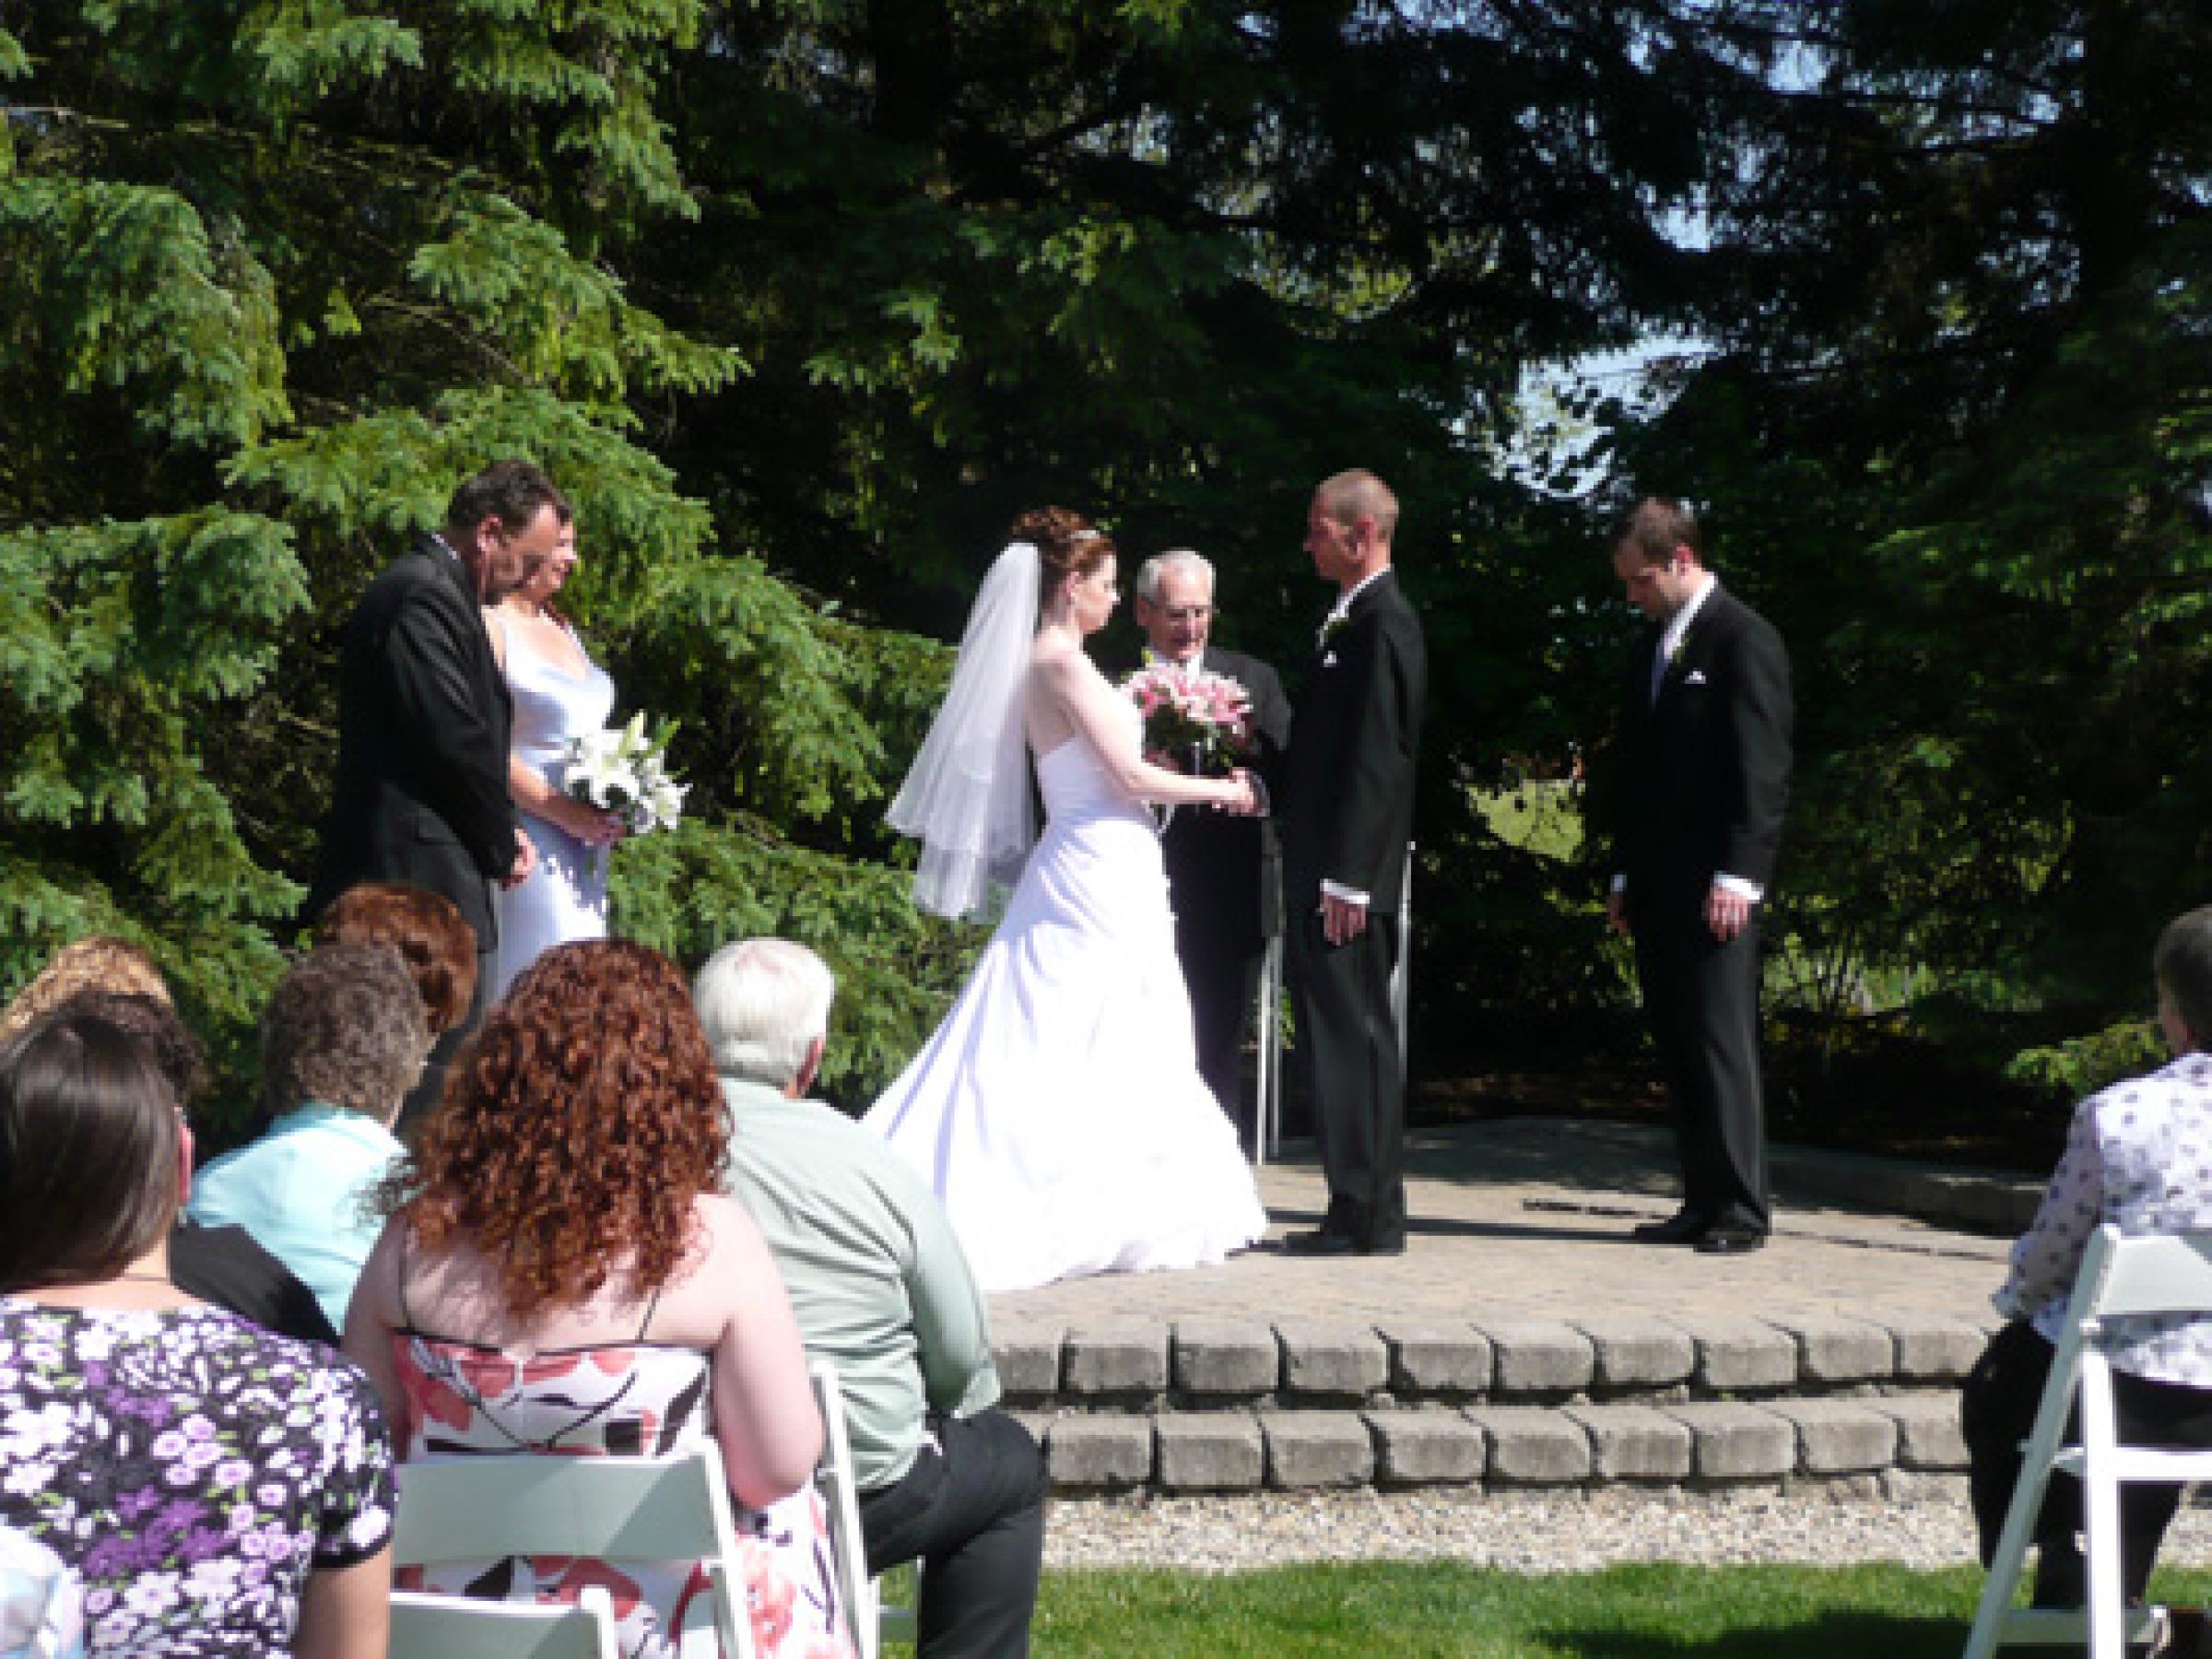 A wedding at Willow Pond